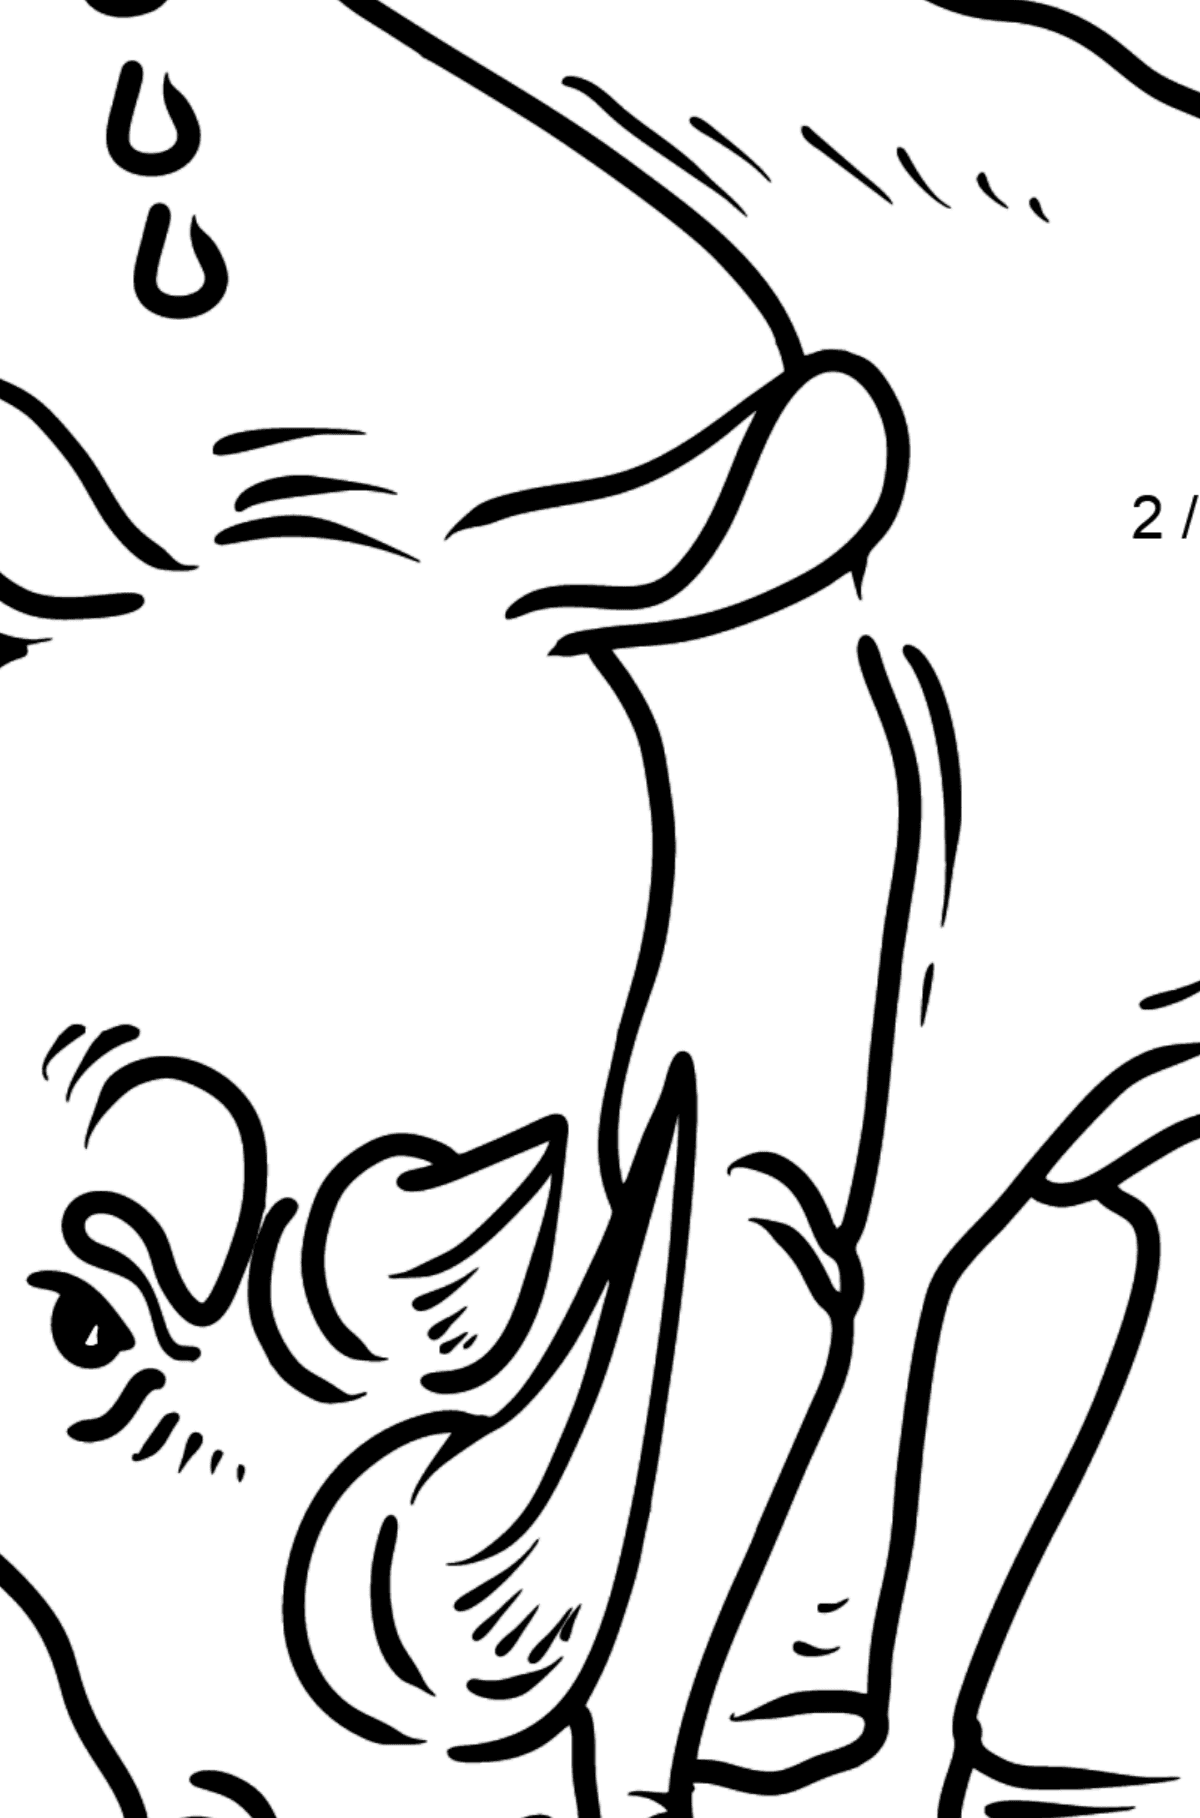 Rhino coloring page - Math Coloring - Division for Kids